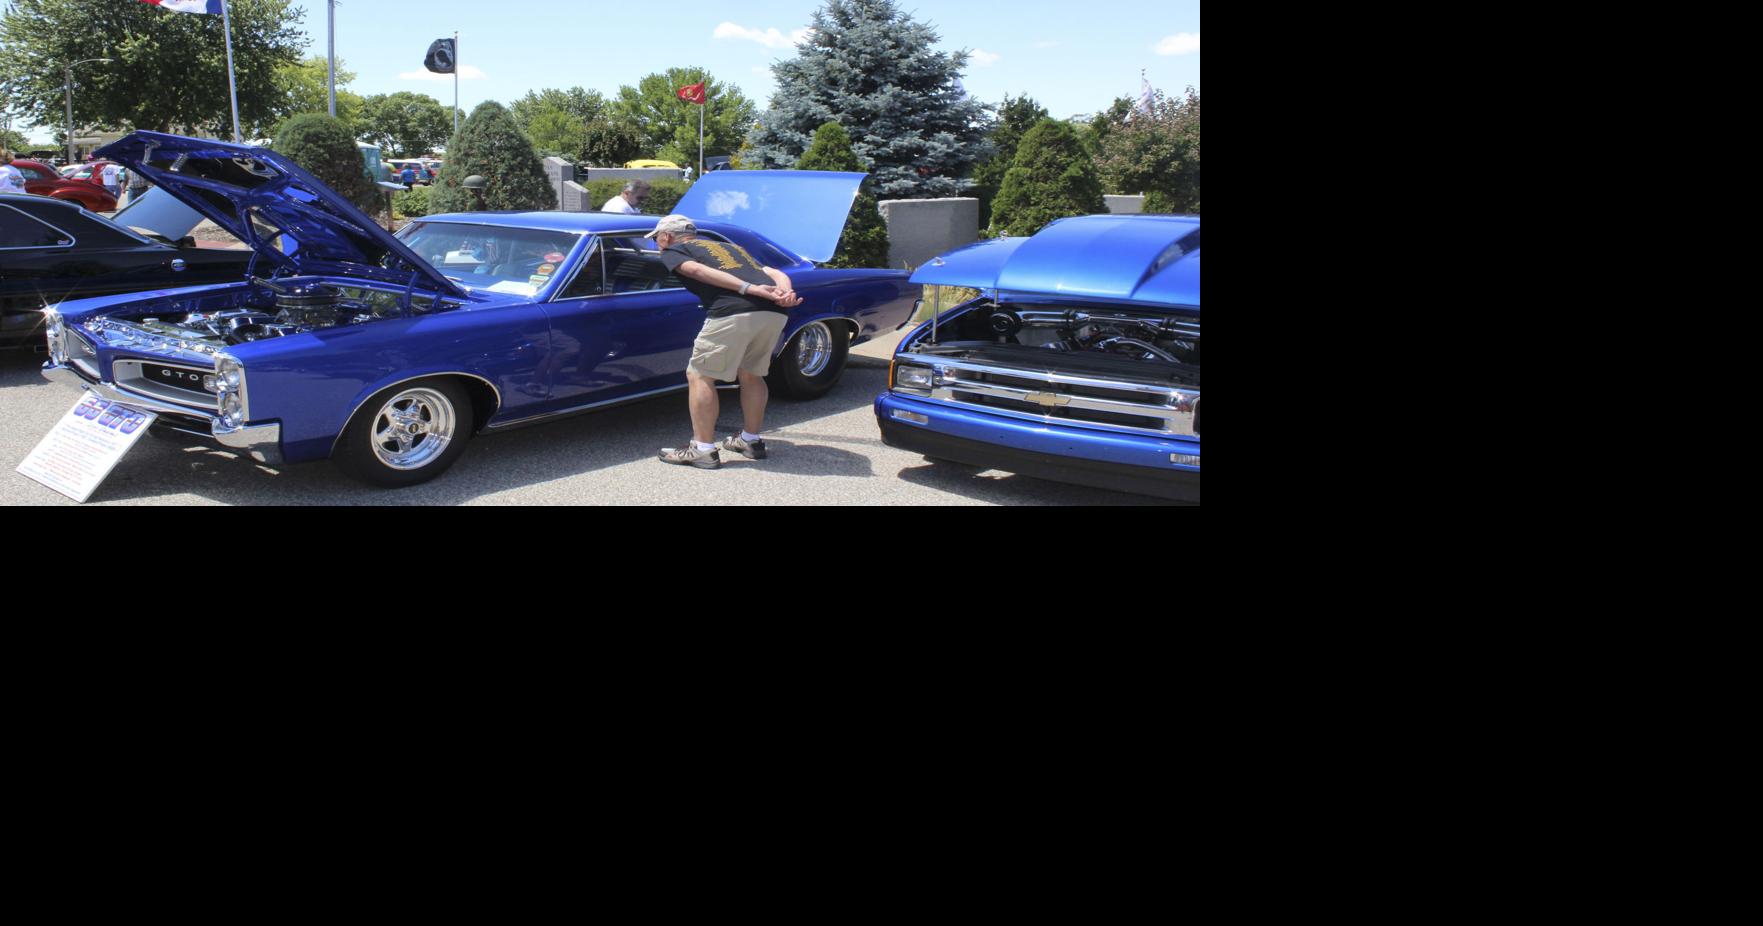 Tractors and classic cars fill Ryan News